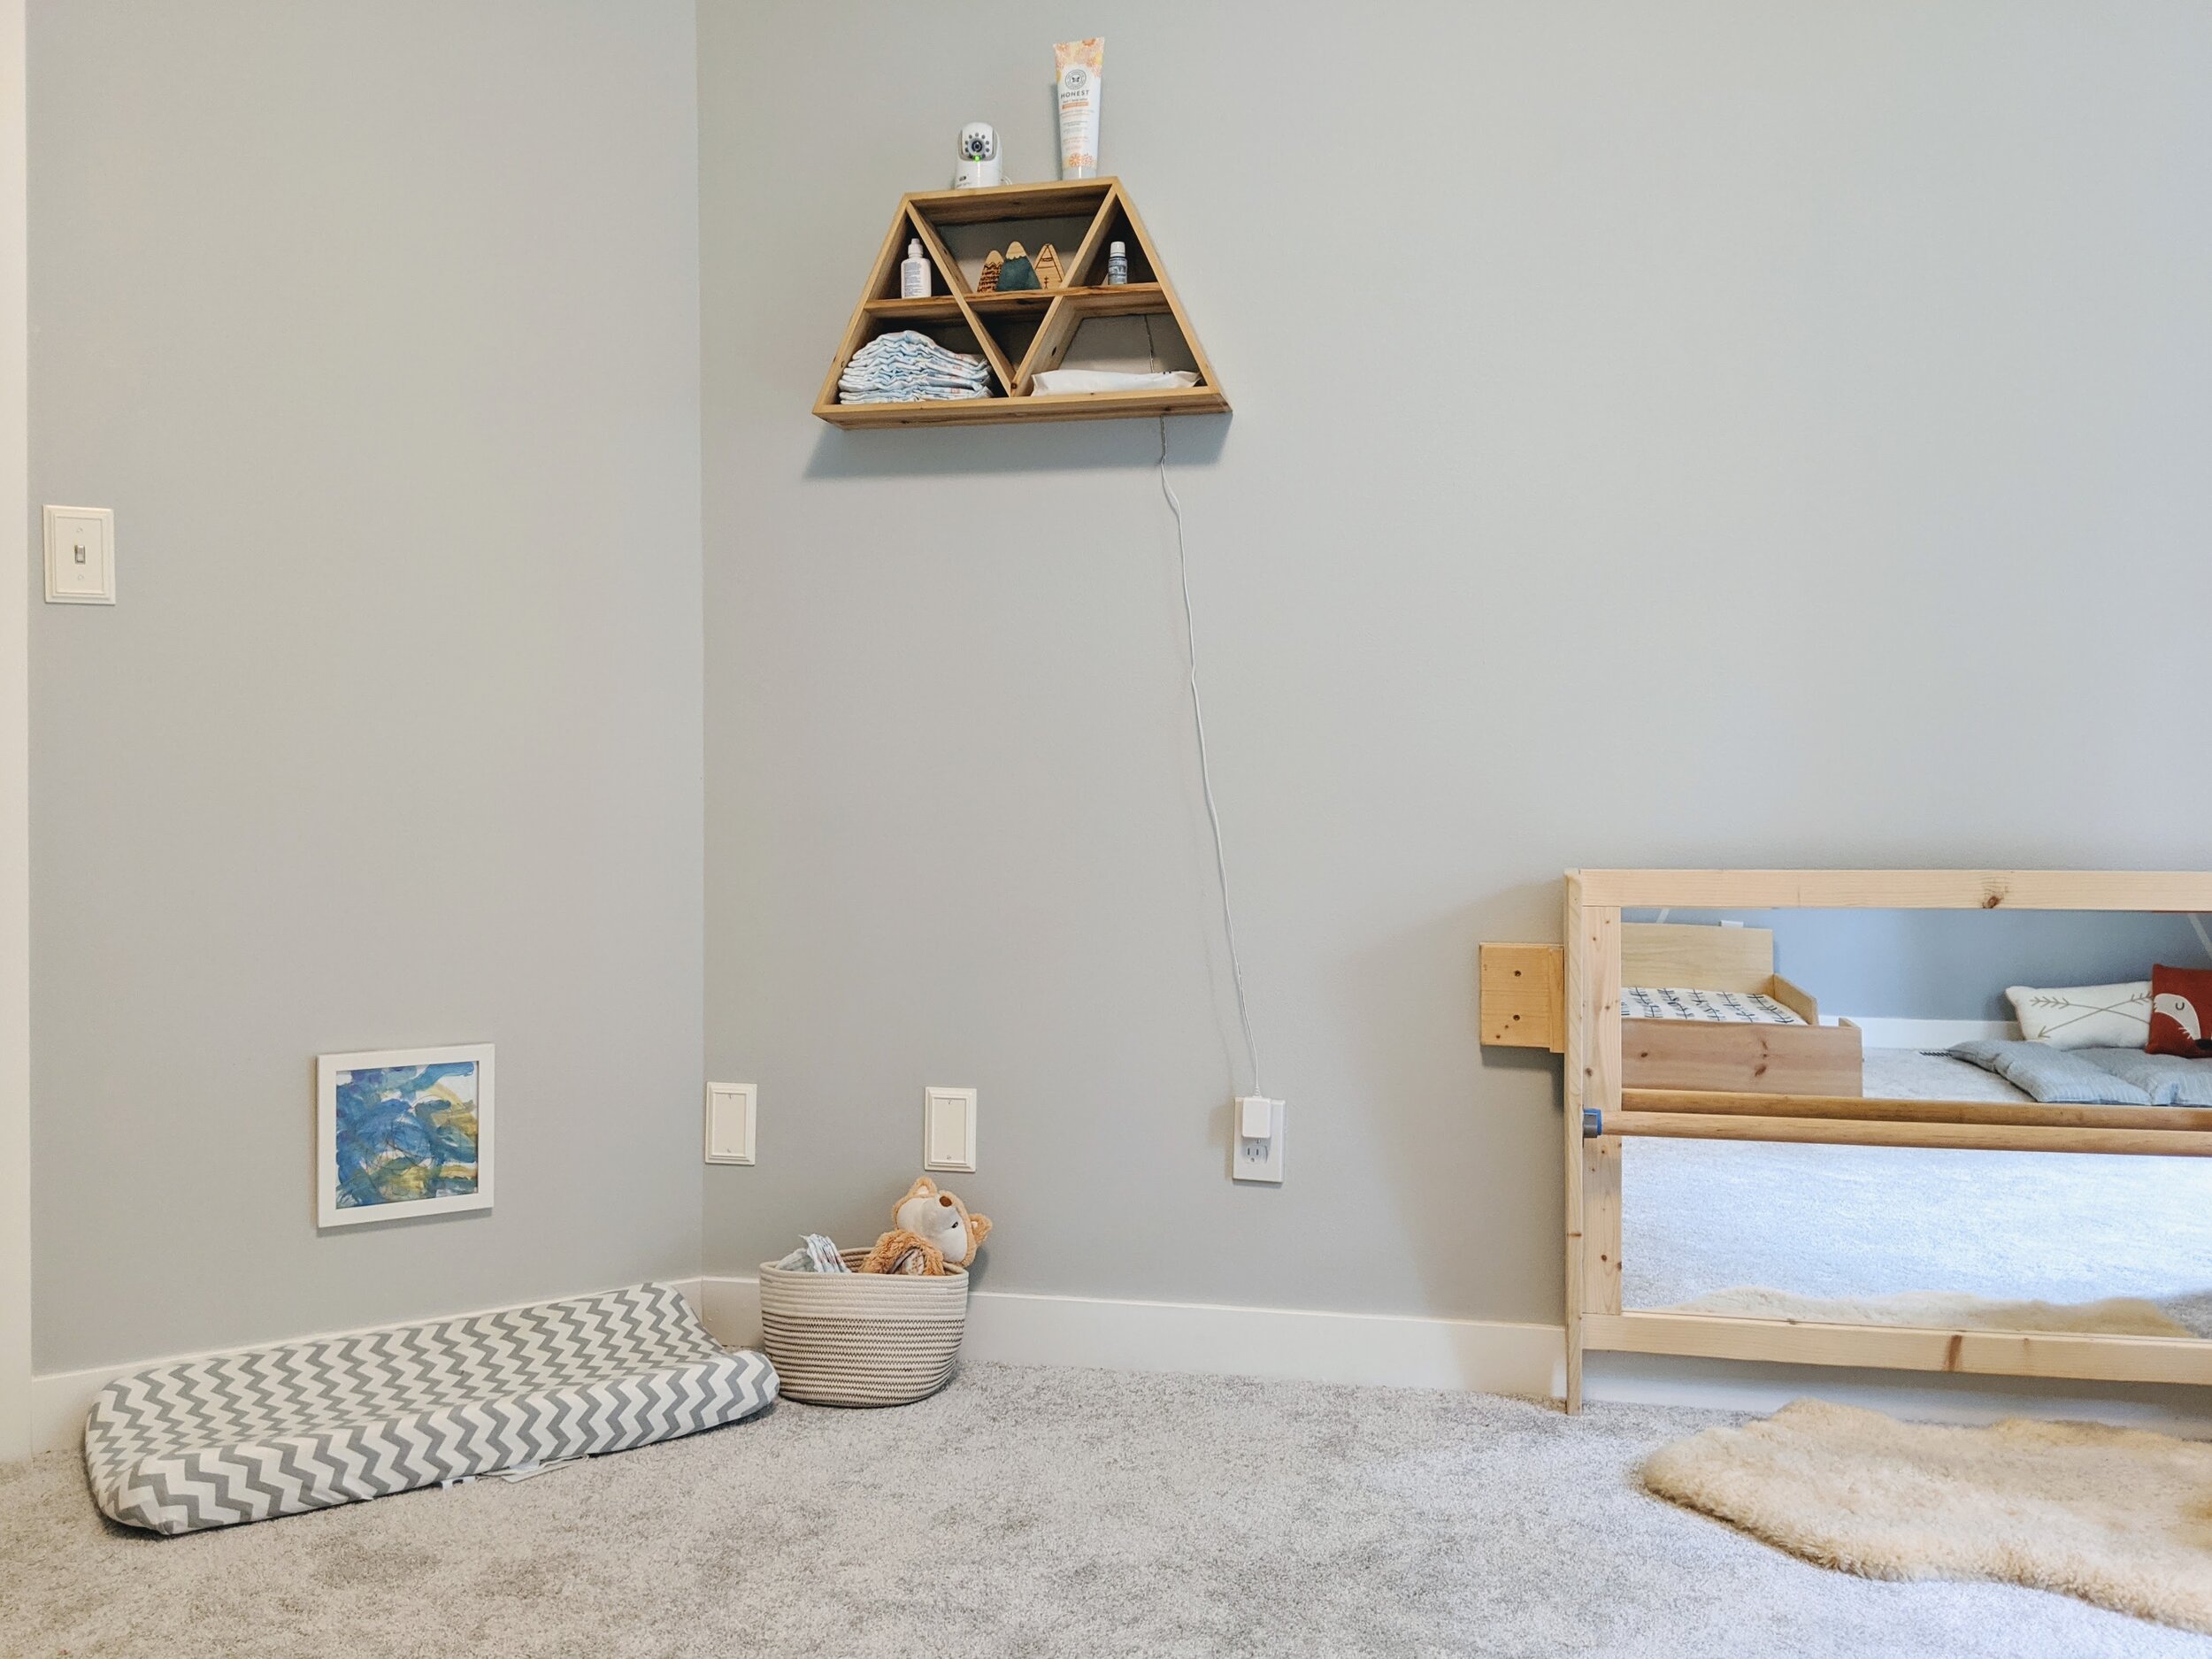 Baby Proofing with a Montessori Floor Bed